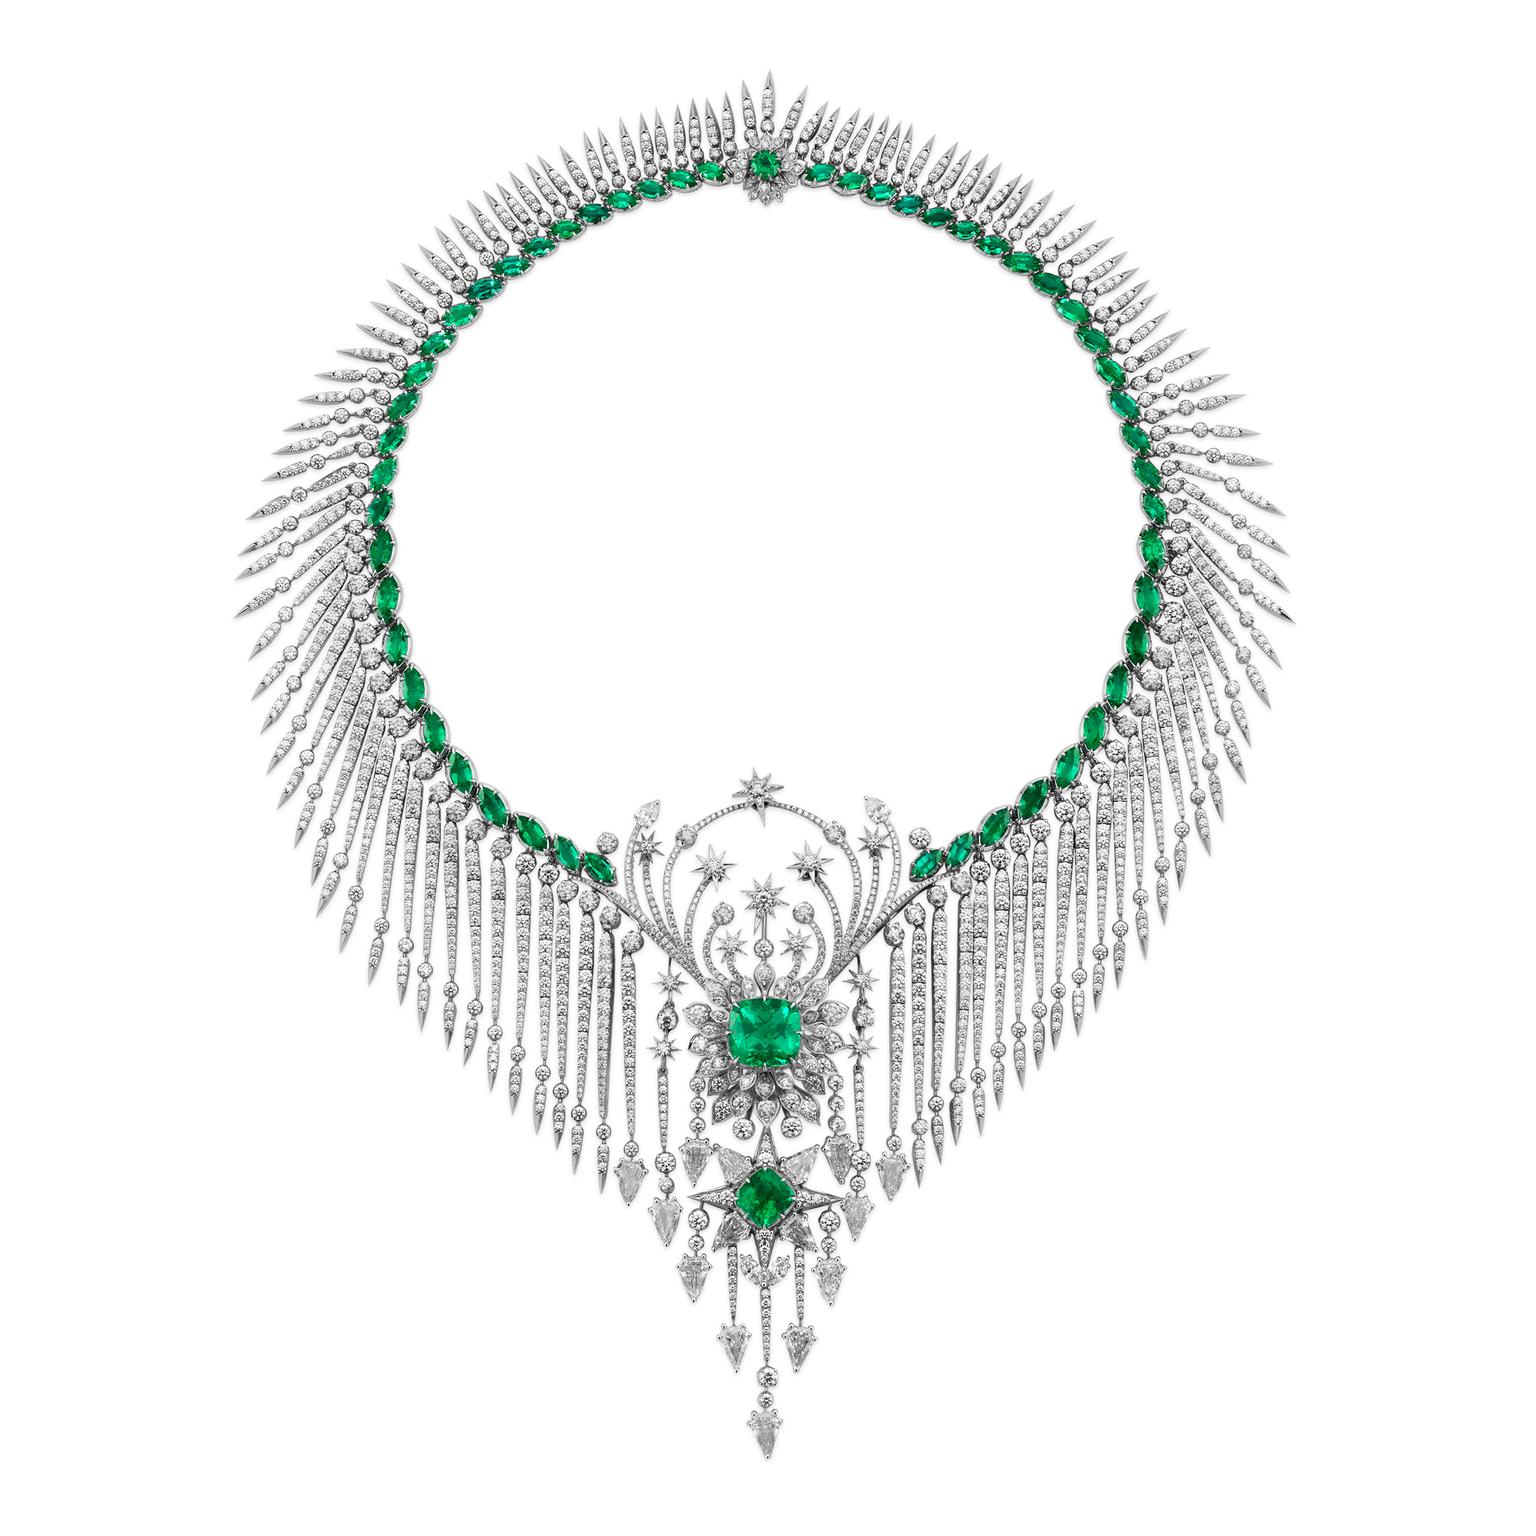 Emerald necklace by Gucci